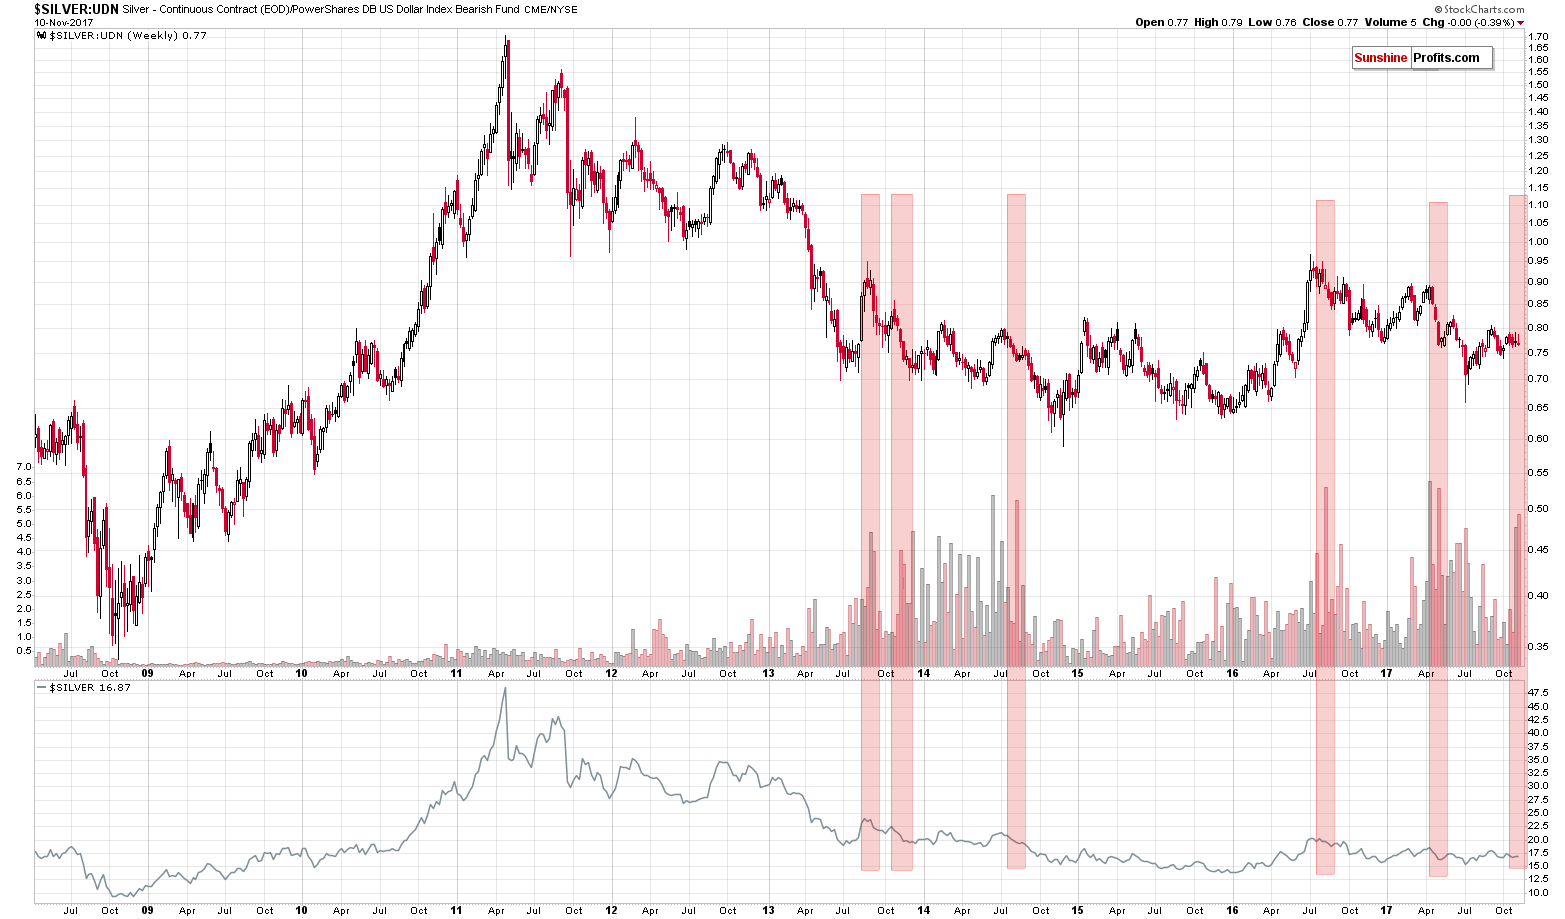 Silver:UDN - Silver from the non-USD perspective